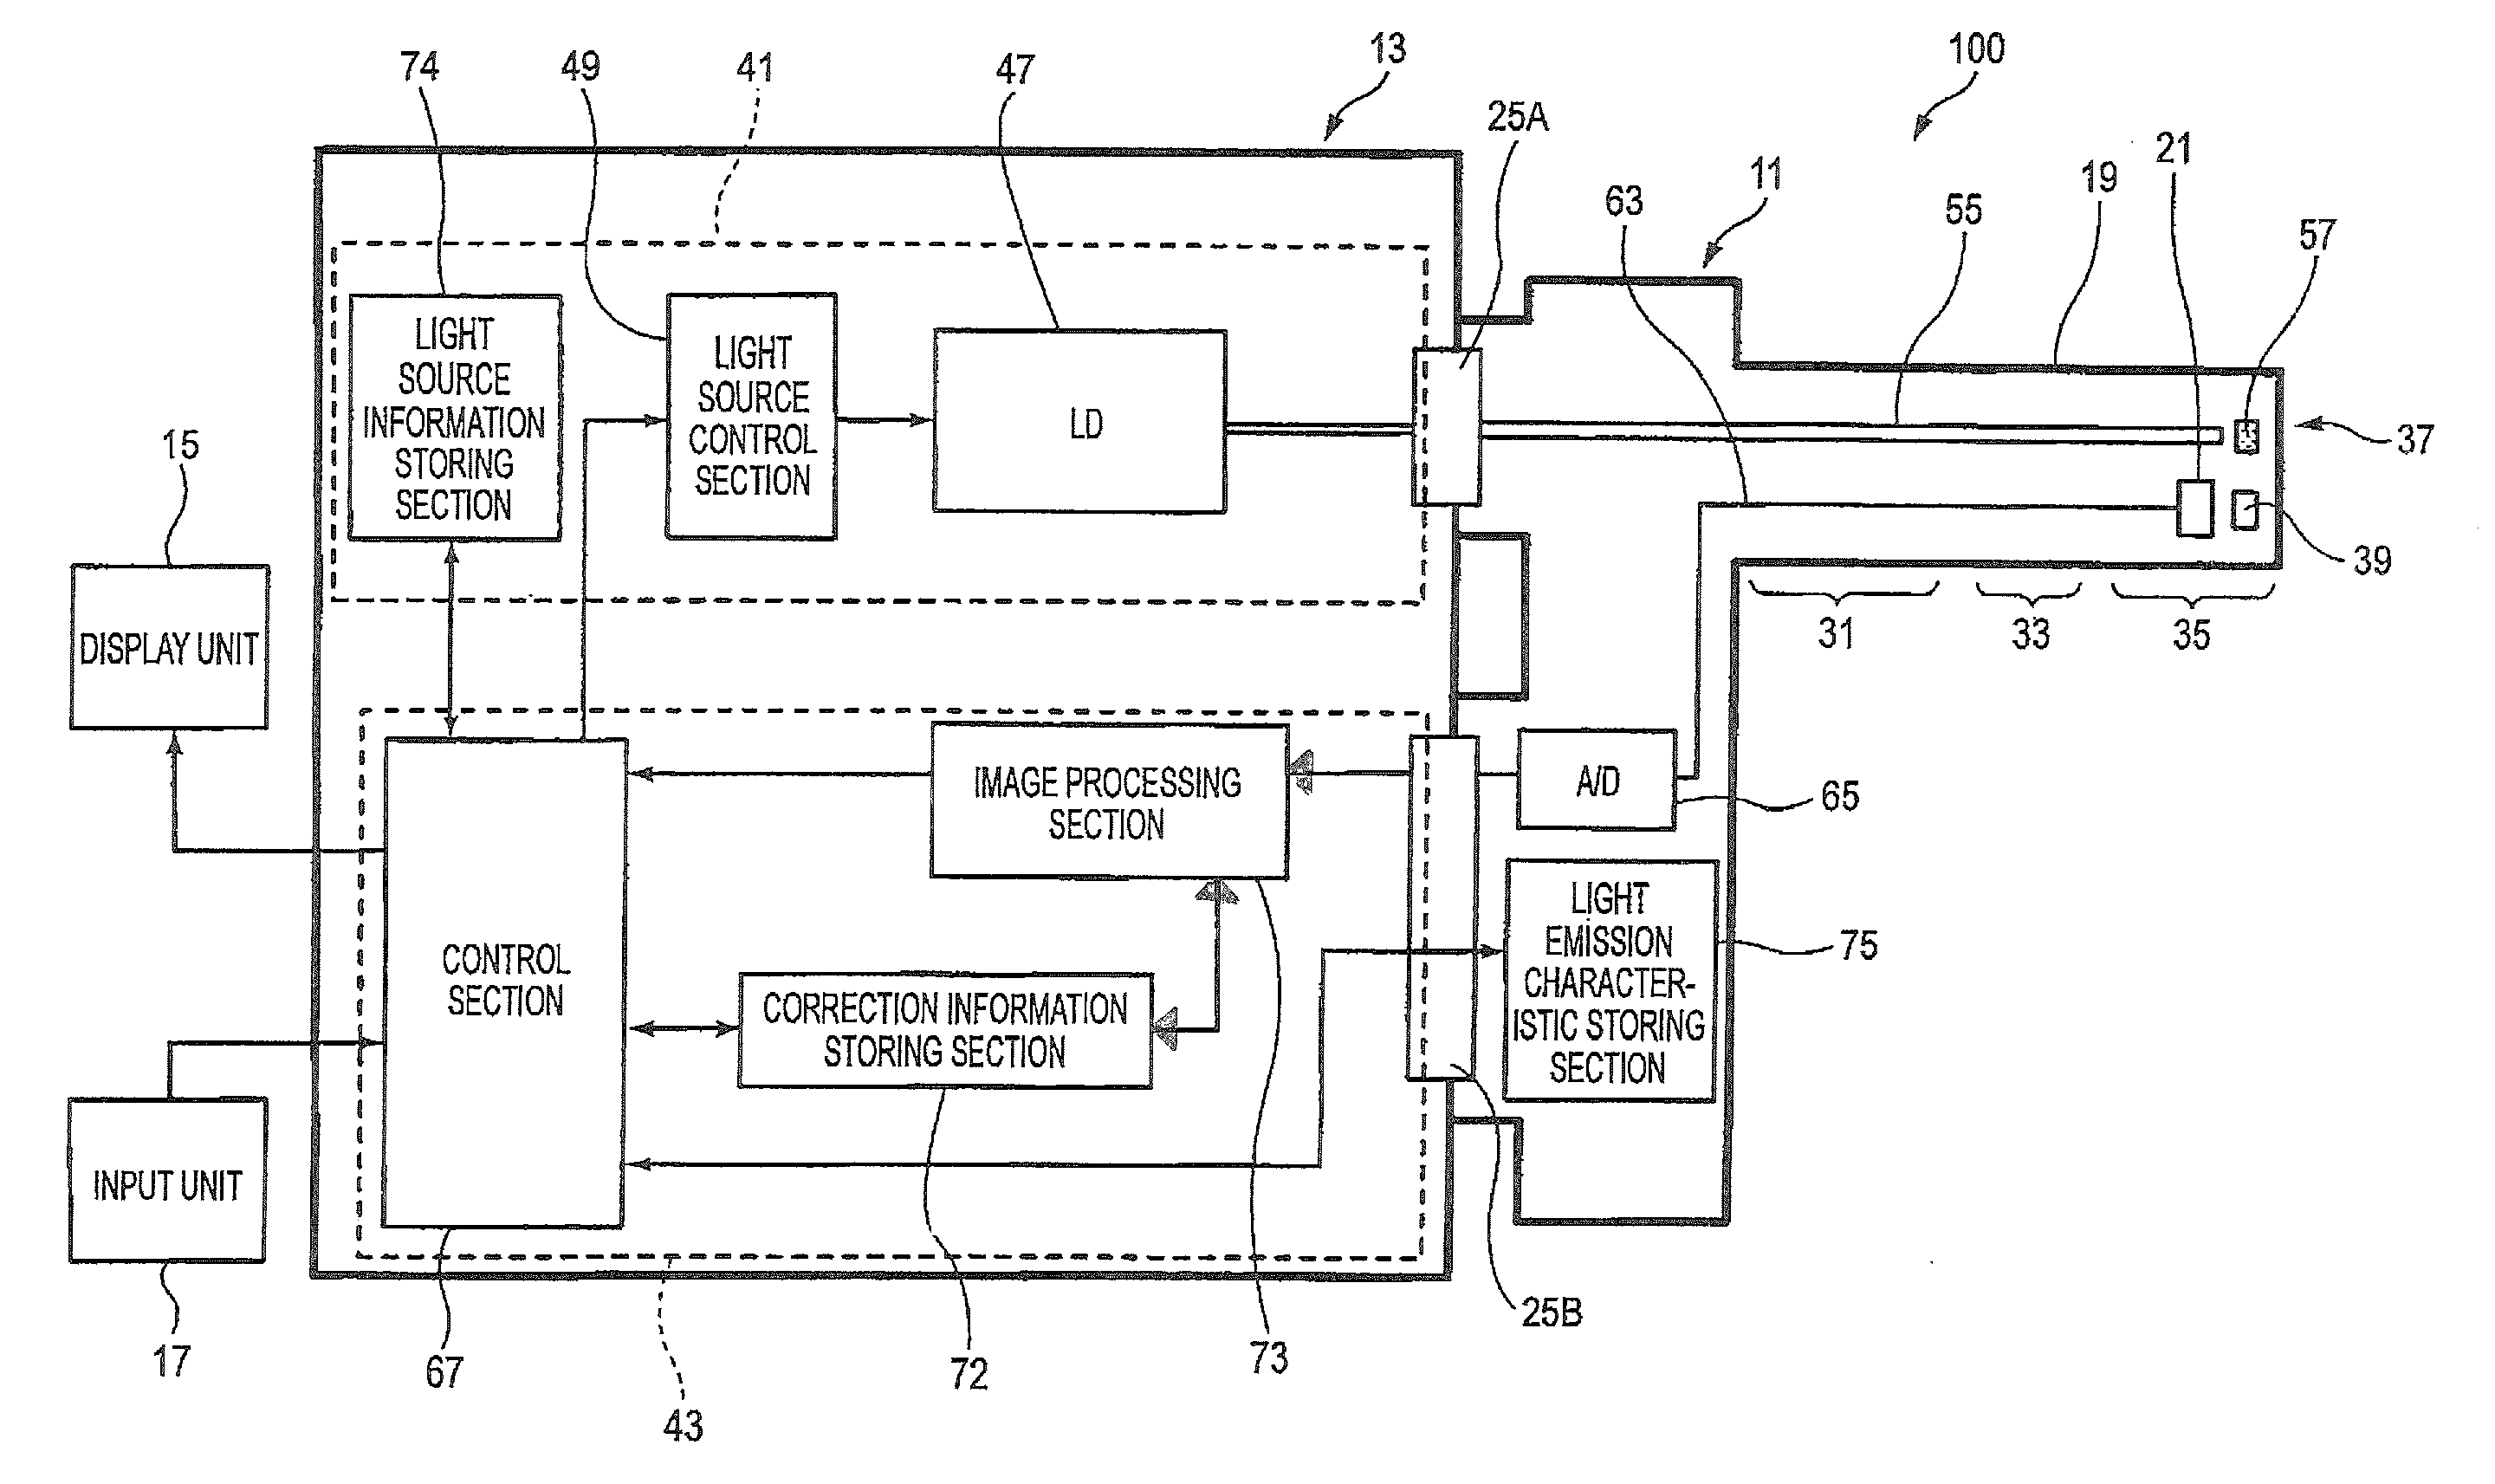 Endoscope system with color correction information